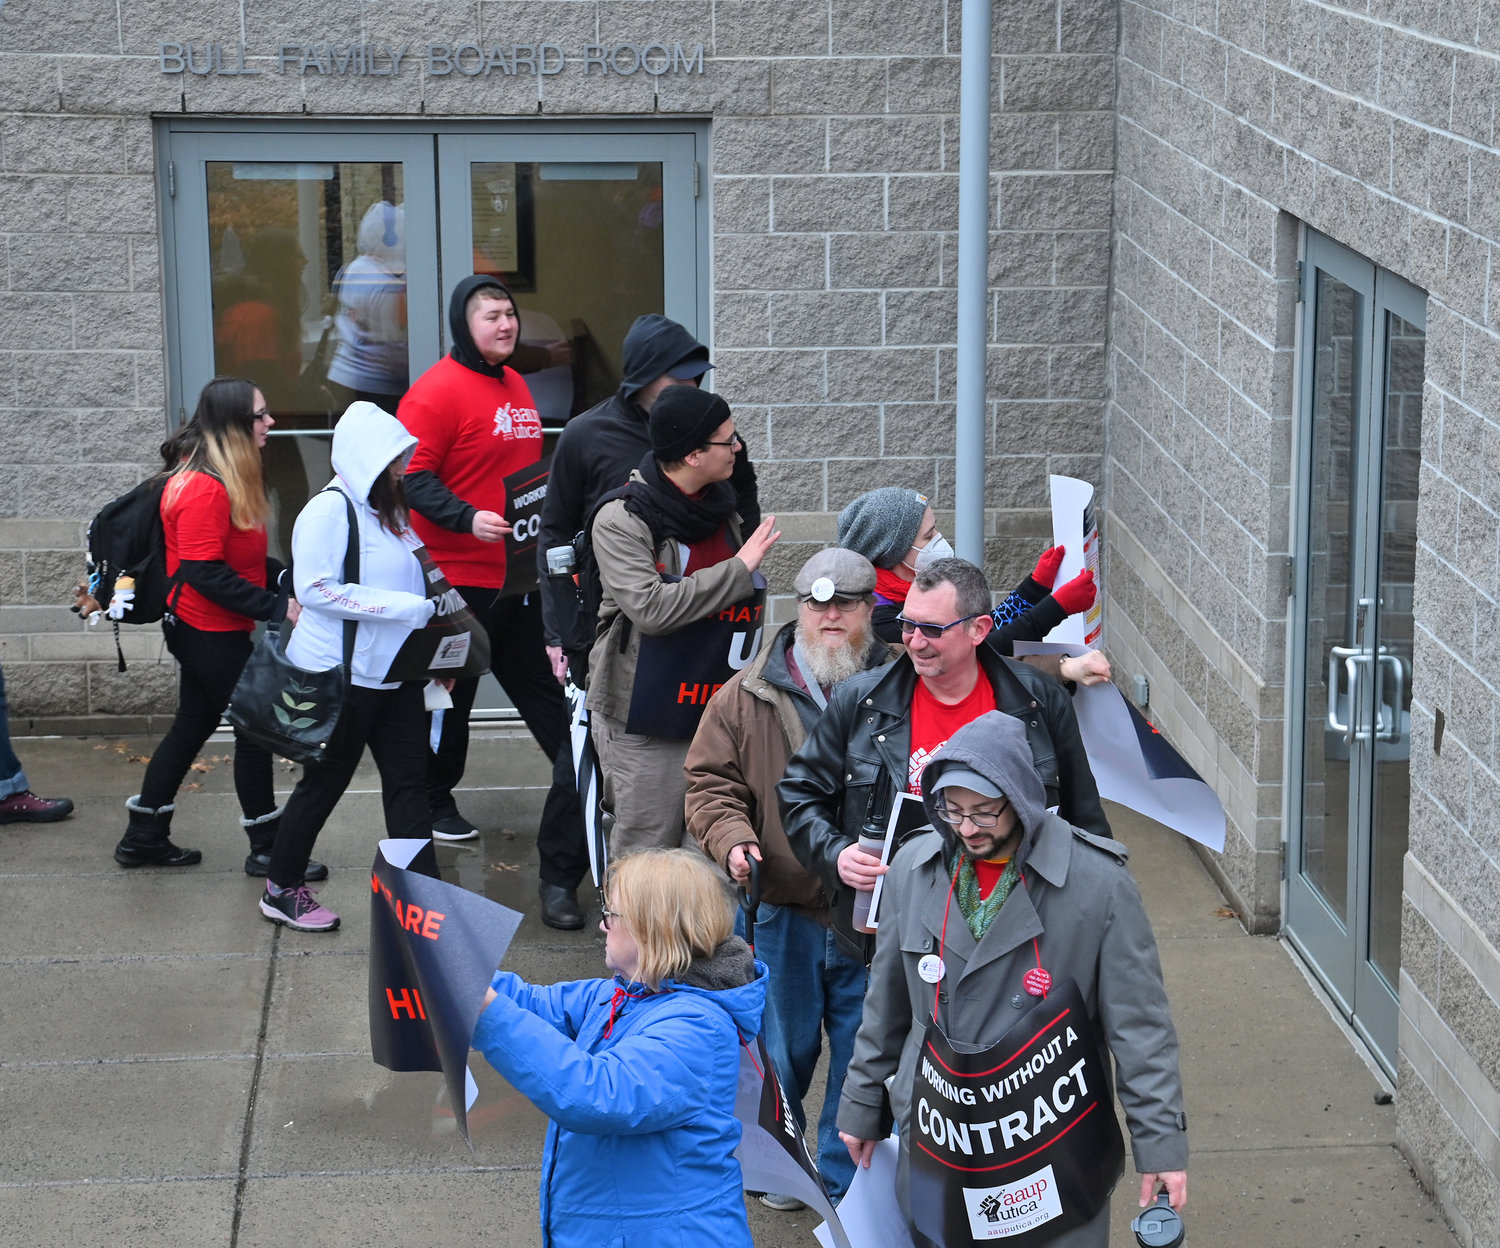 Protesters parade by the Bull Family Board Room Friday, Feb 17, 2023 at Utica University.